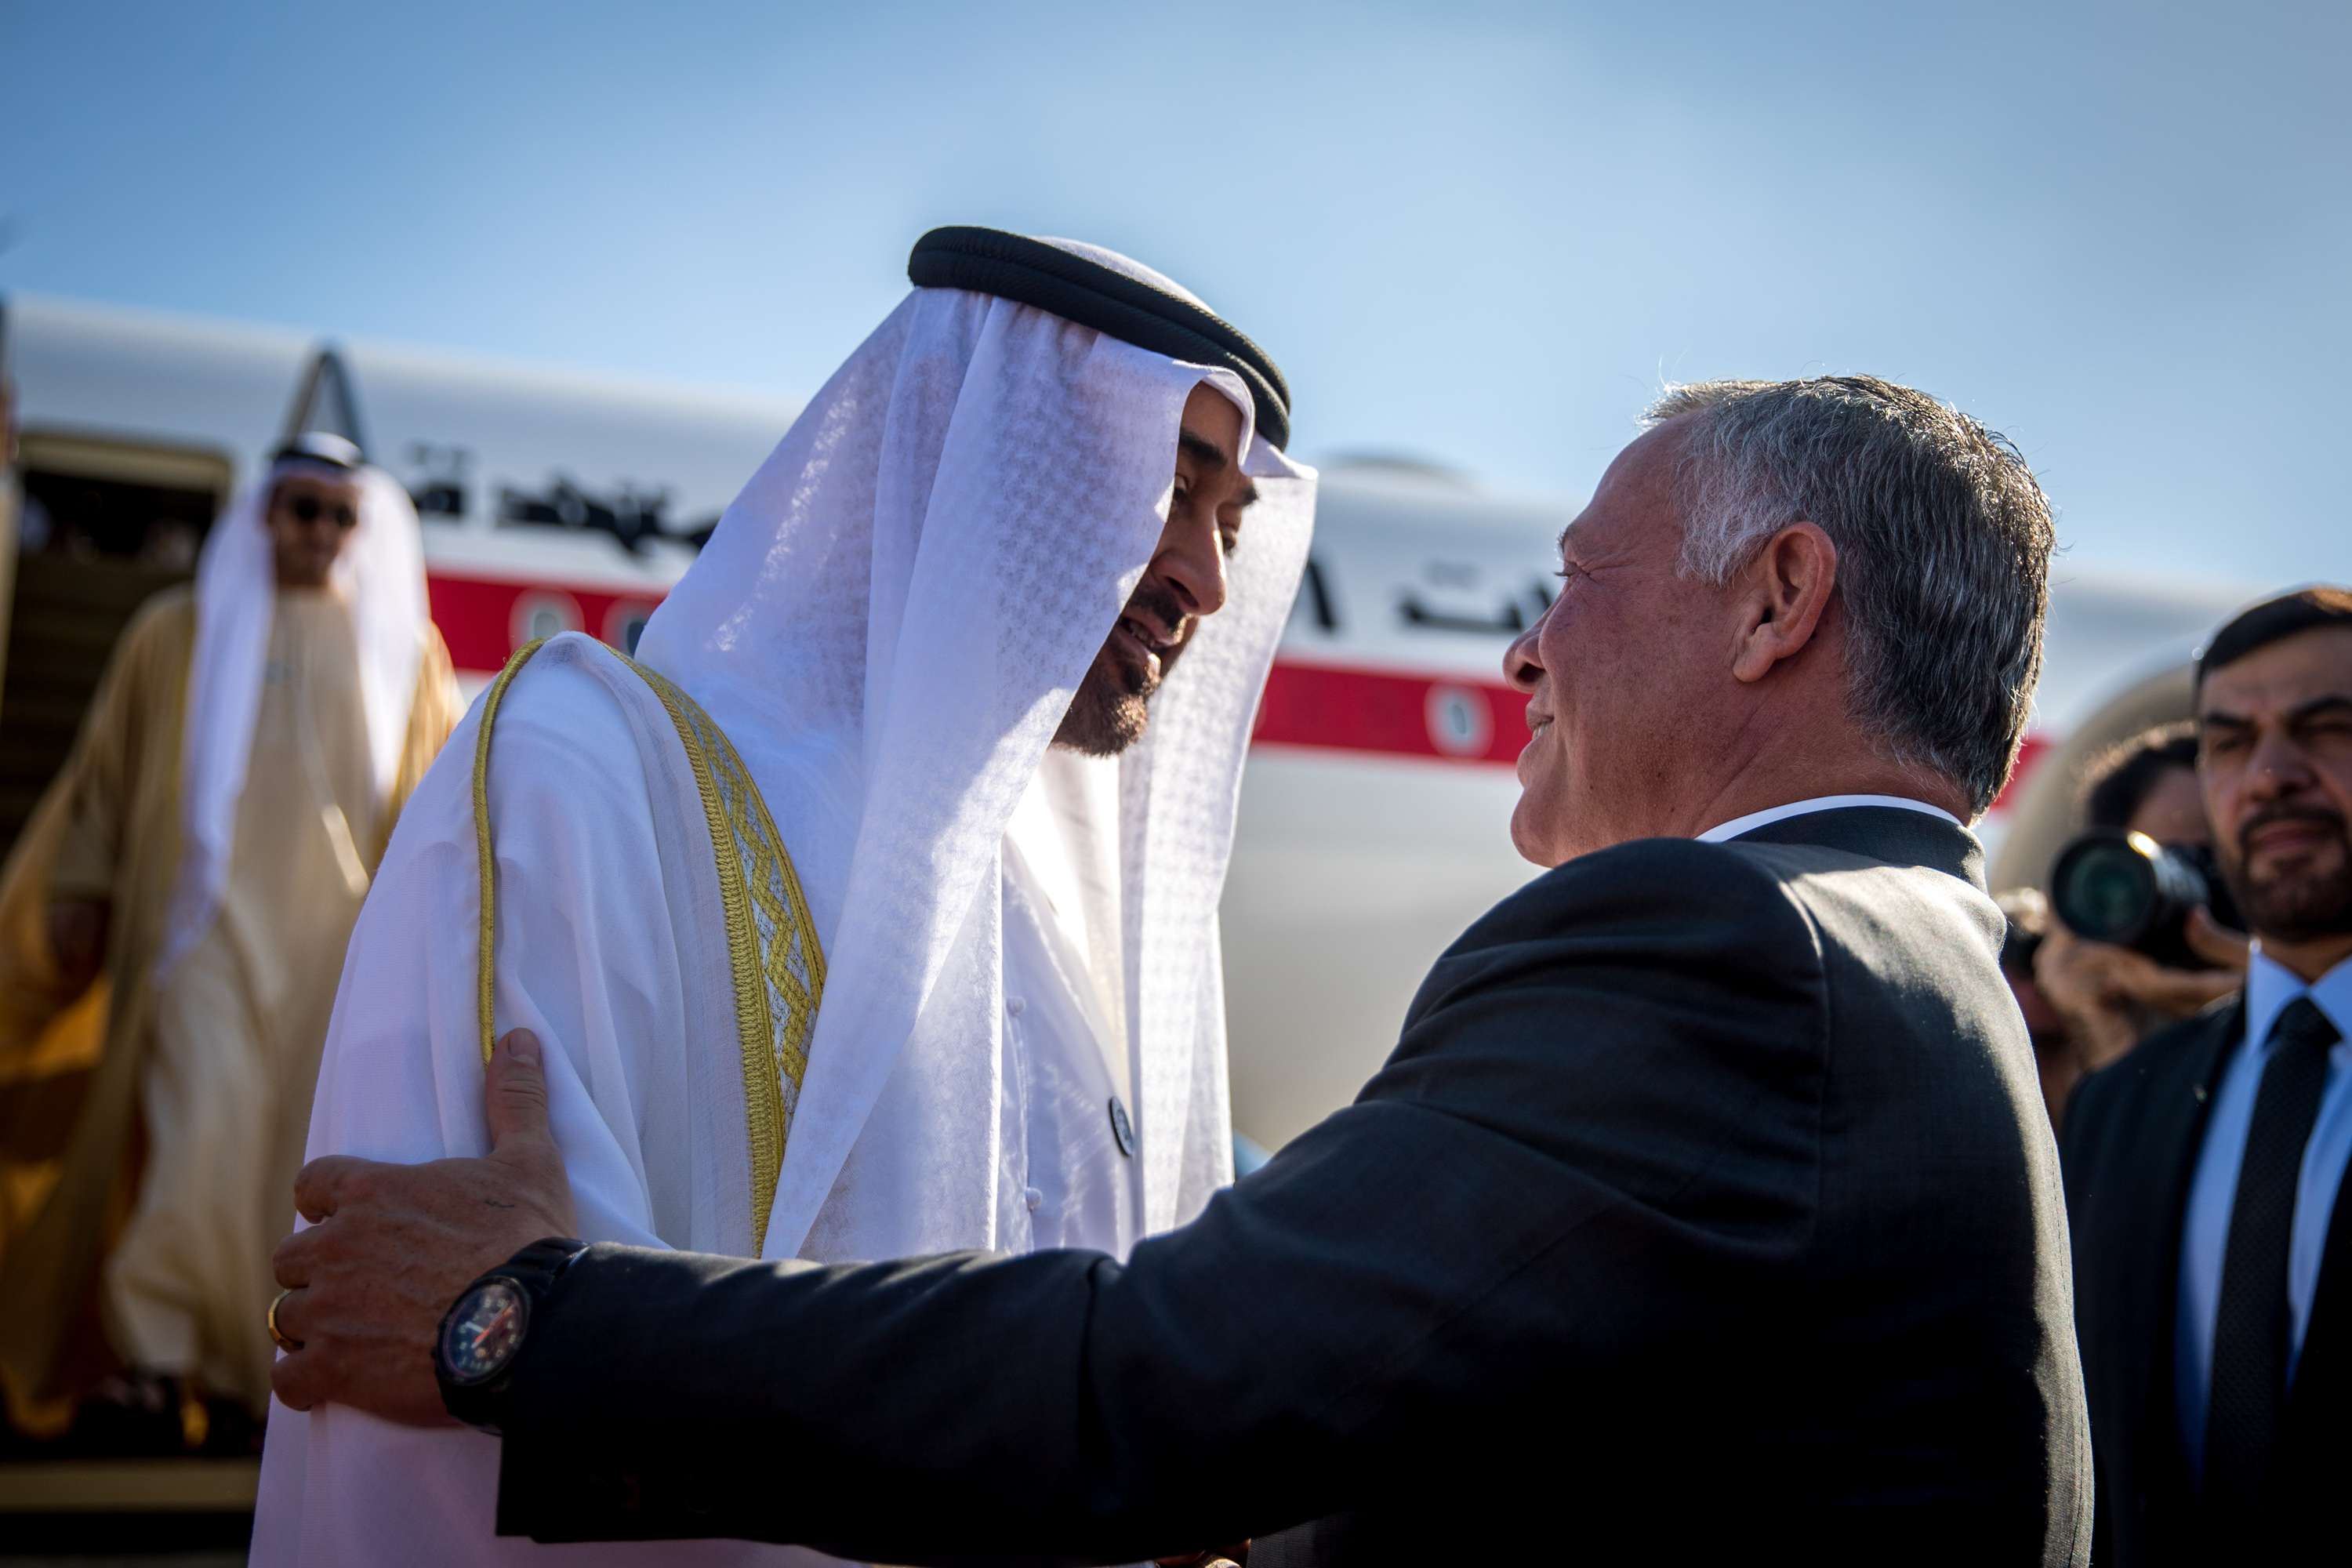 The King also stressed Jordan’s readiness to provide any assistance needed by the people of the UAE